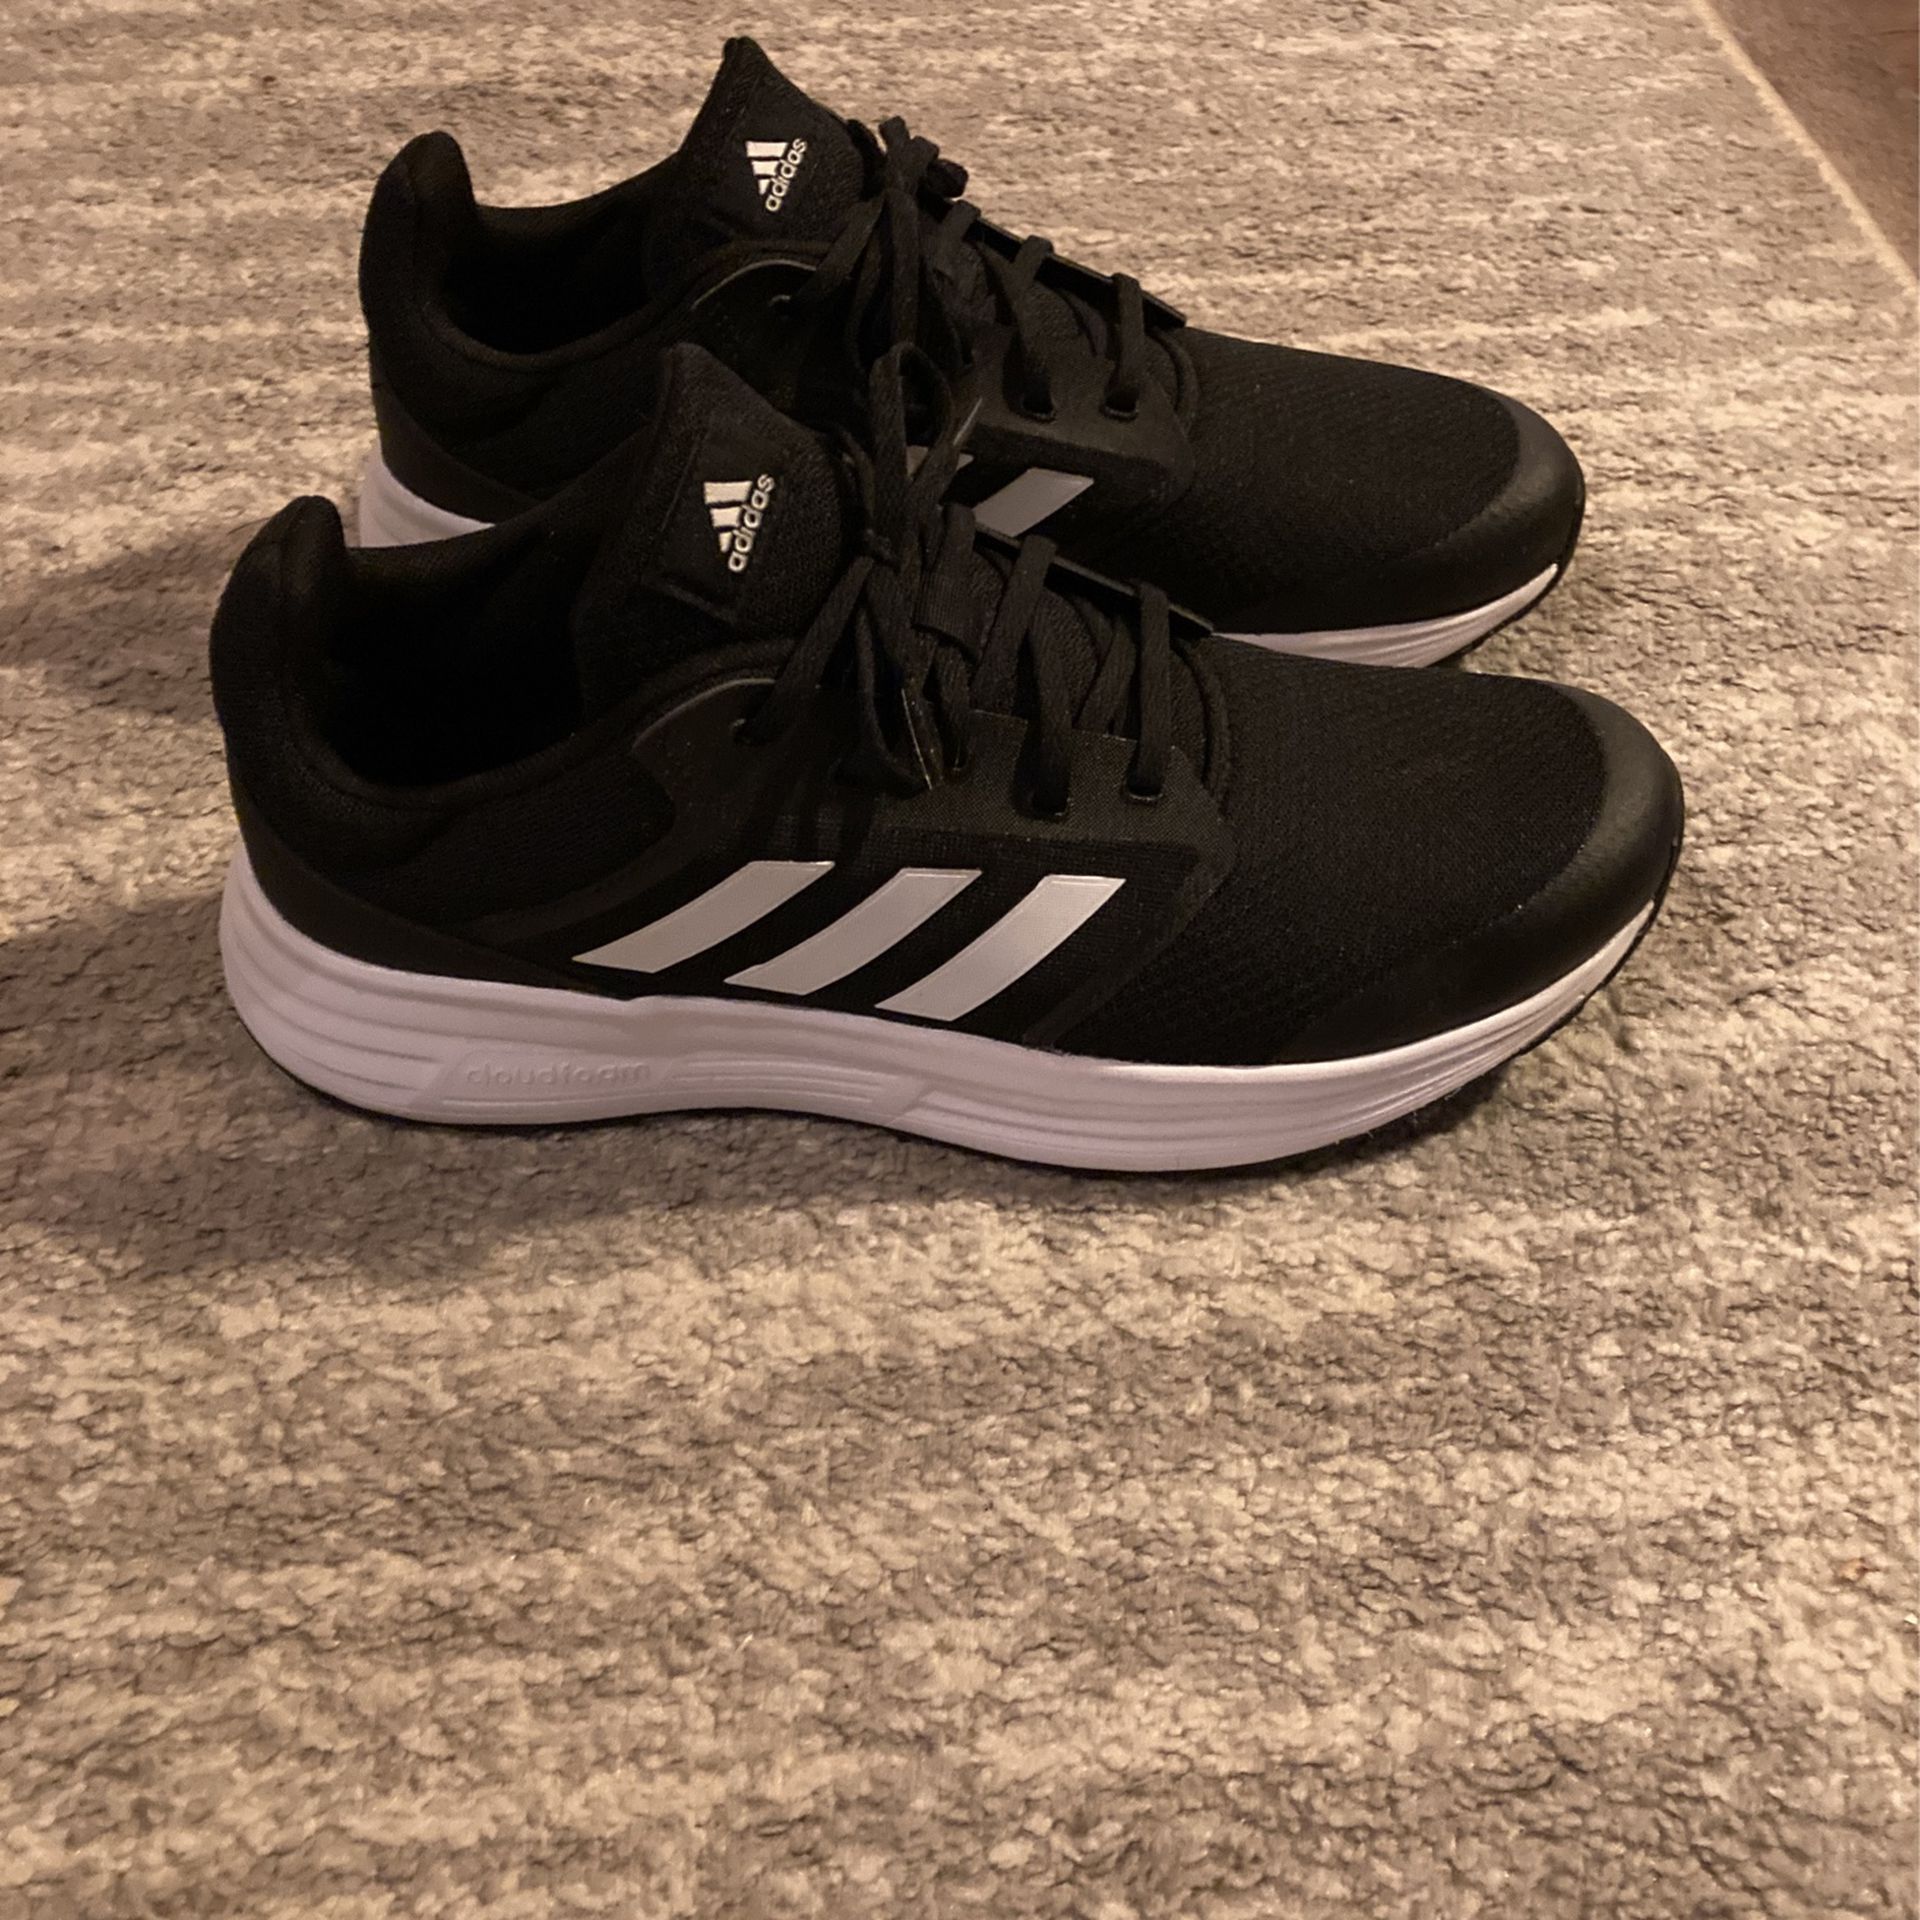 Black and White Adidas Cloudfoam Sneakers for Sale in Tulsa, OK - OfferUp